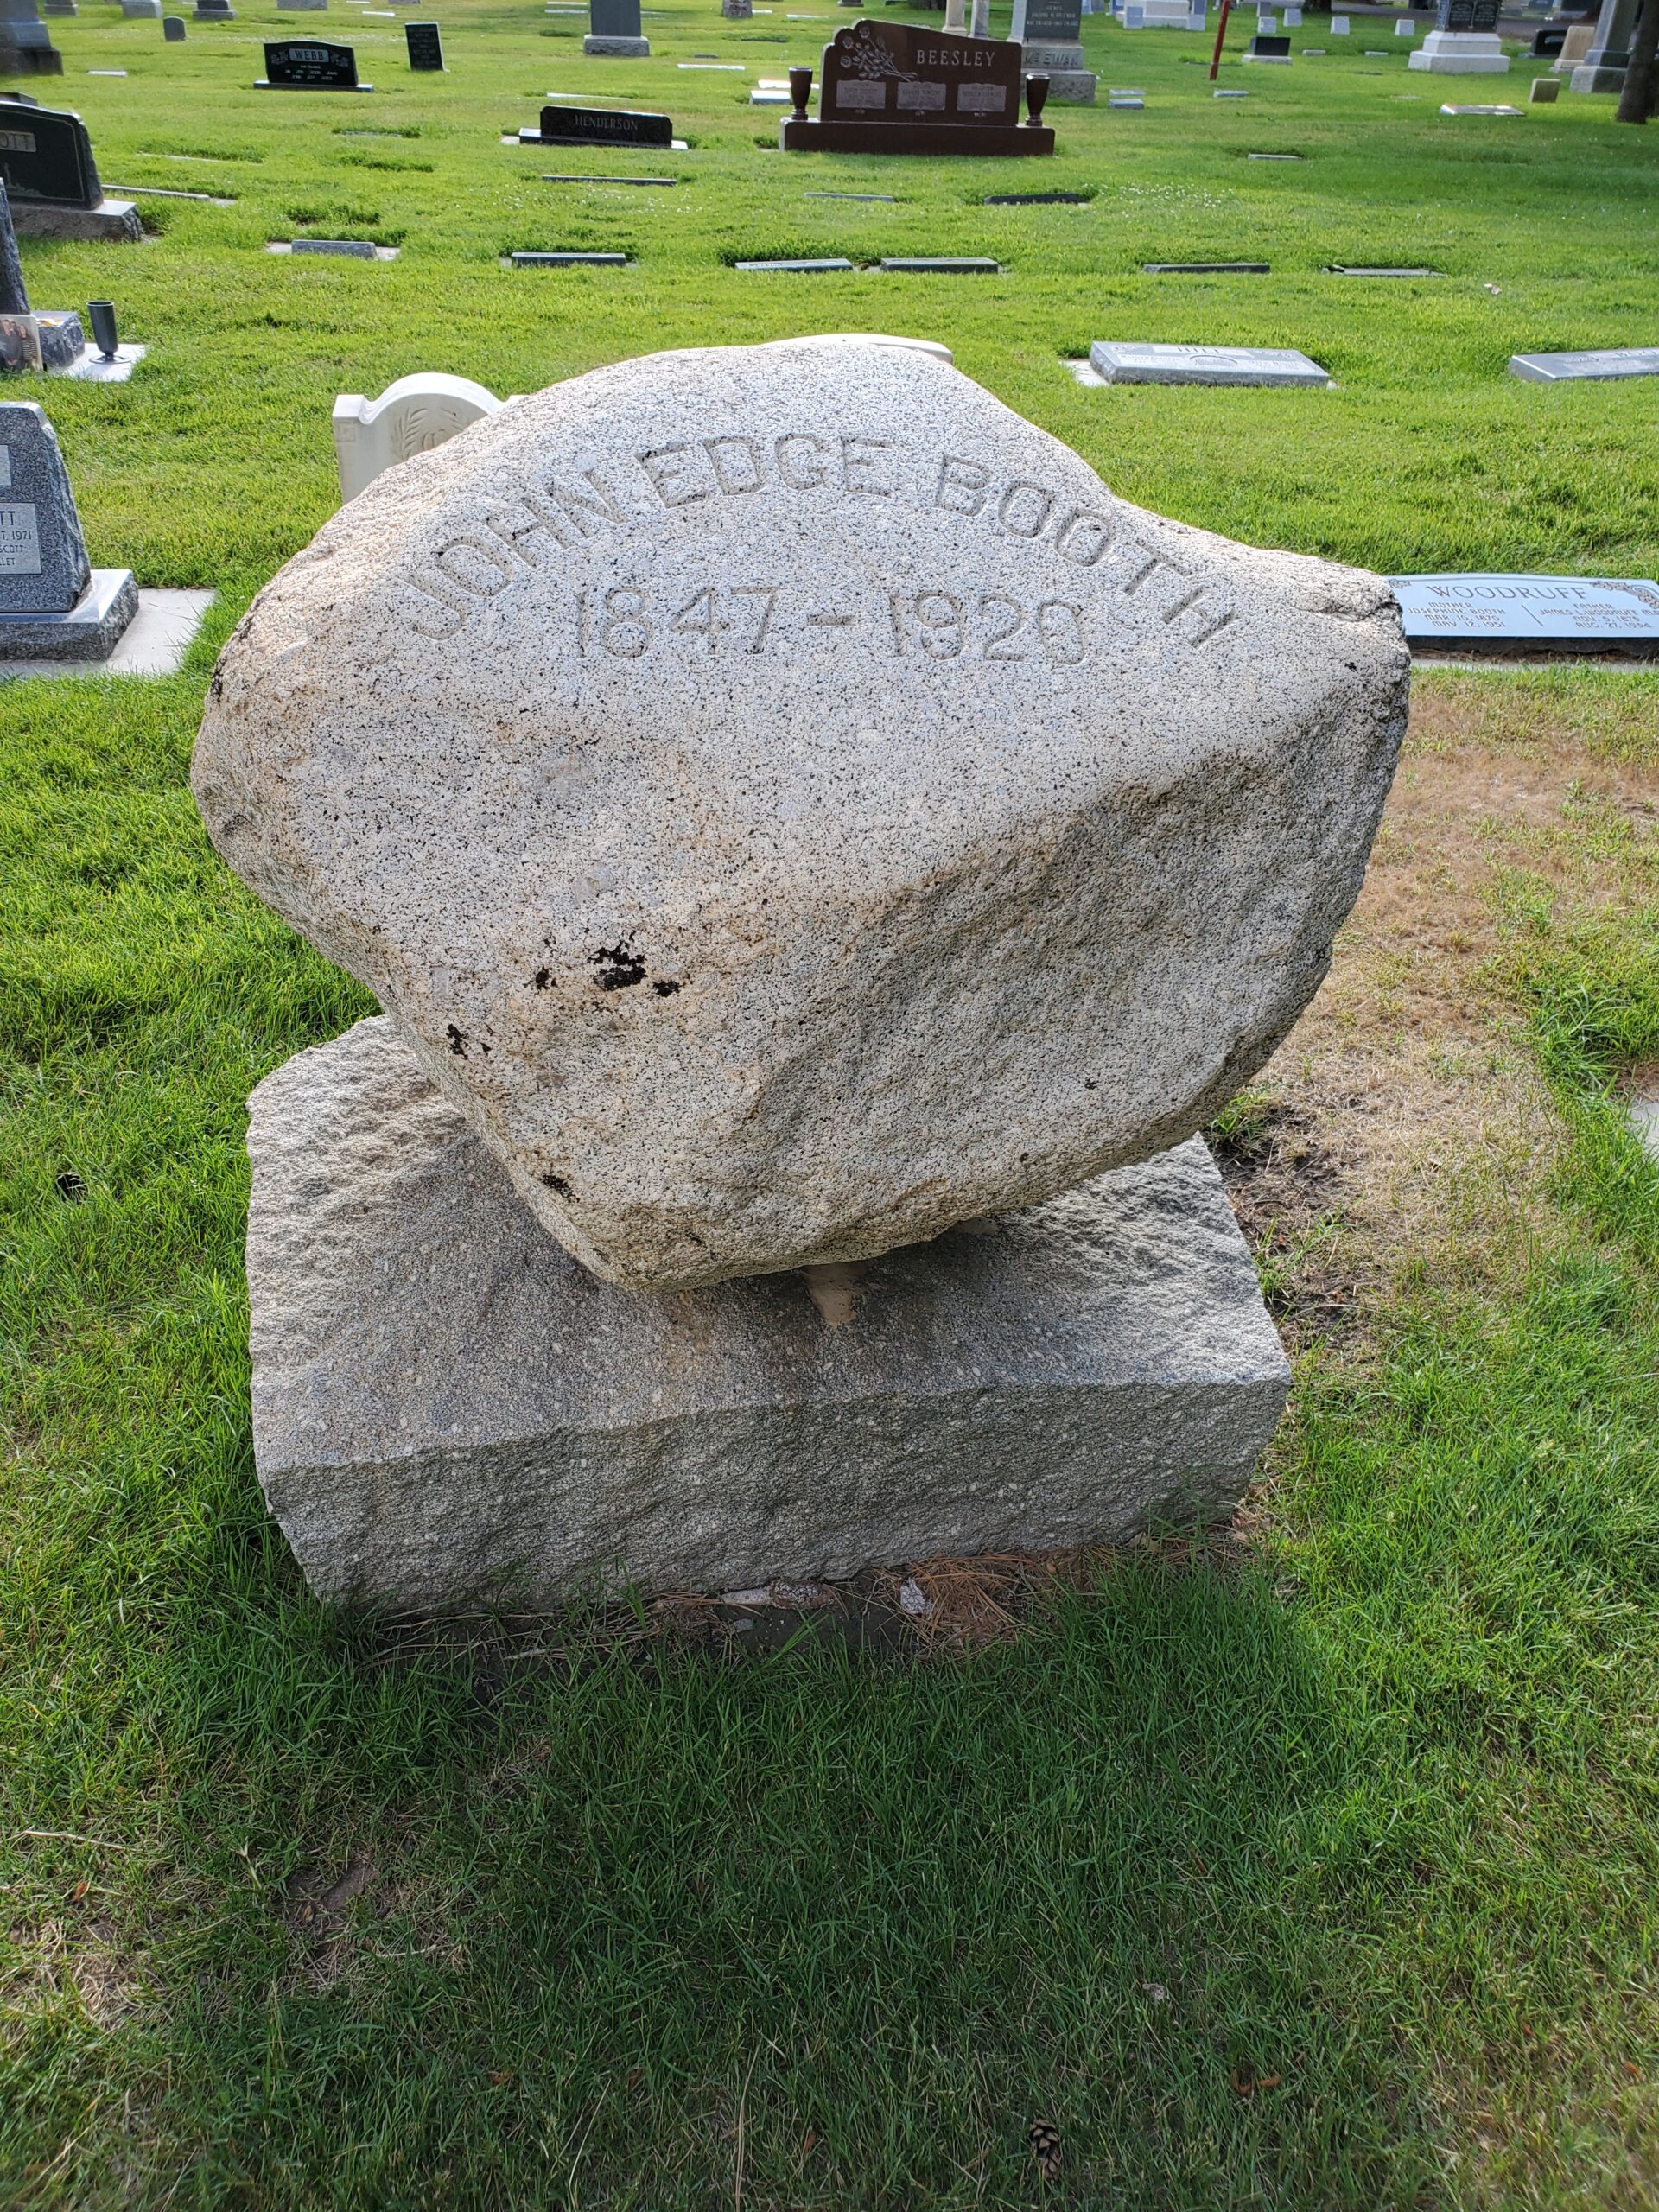 This grave marker is a simple boulder engraved with a name